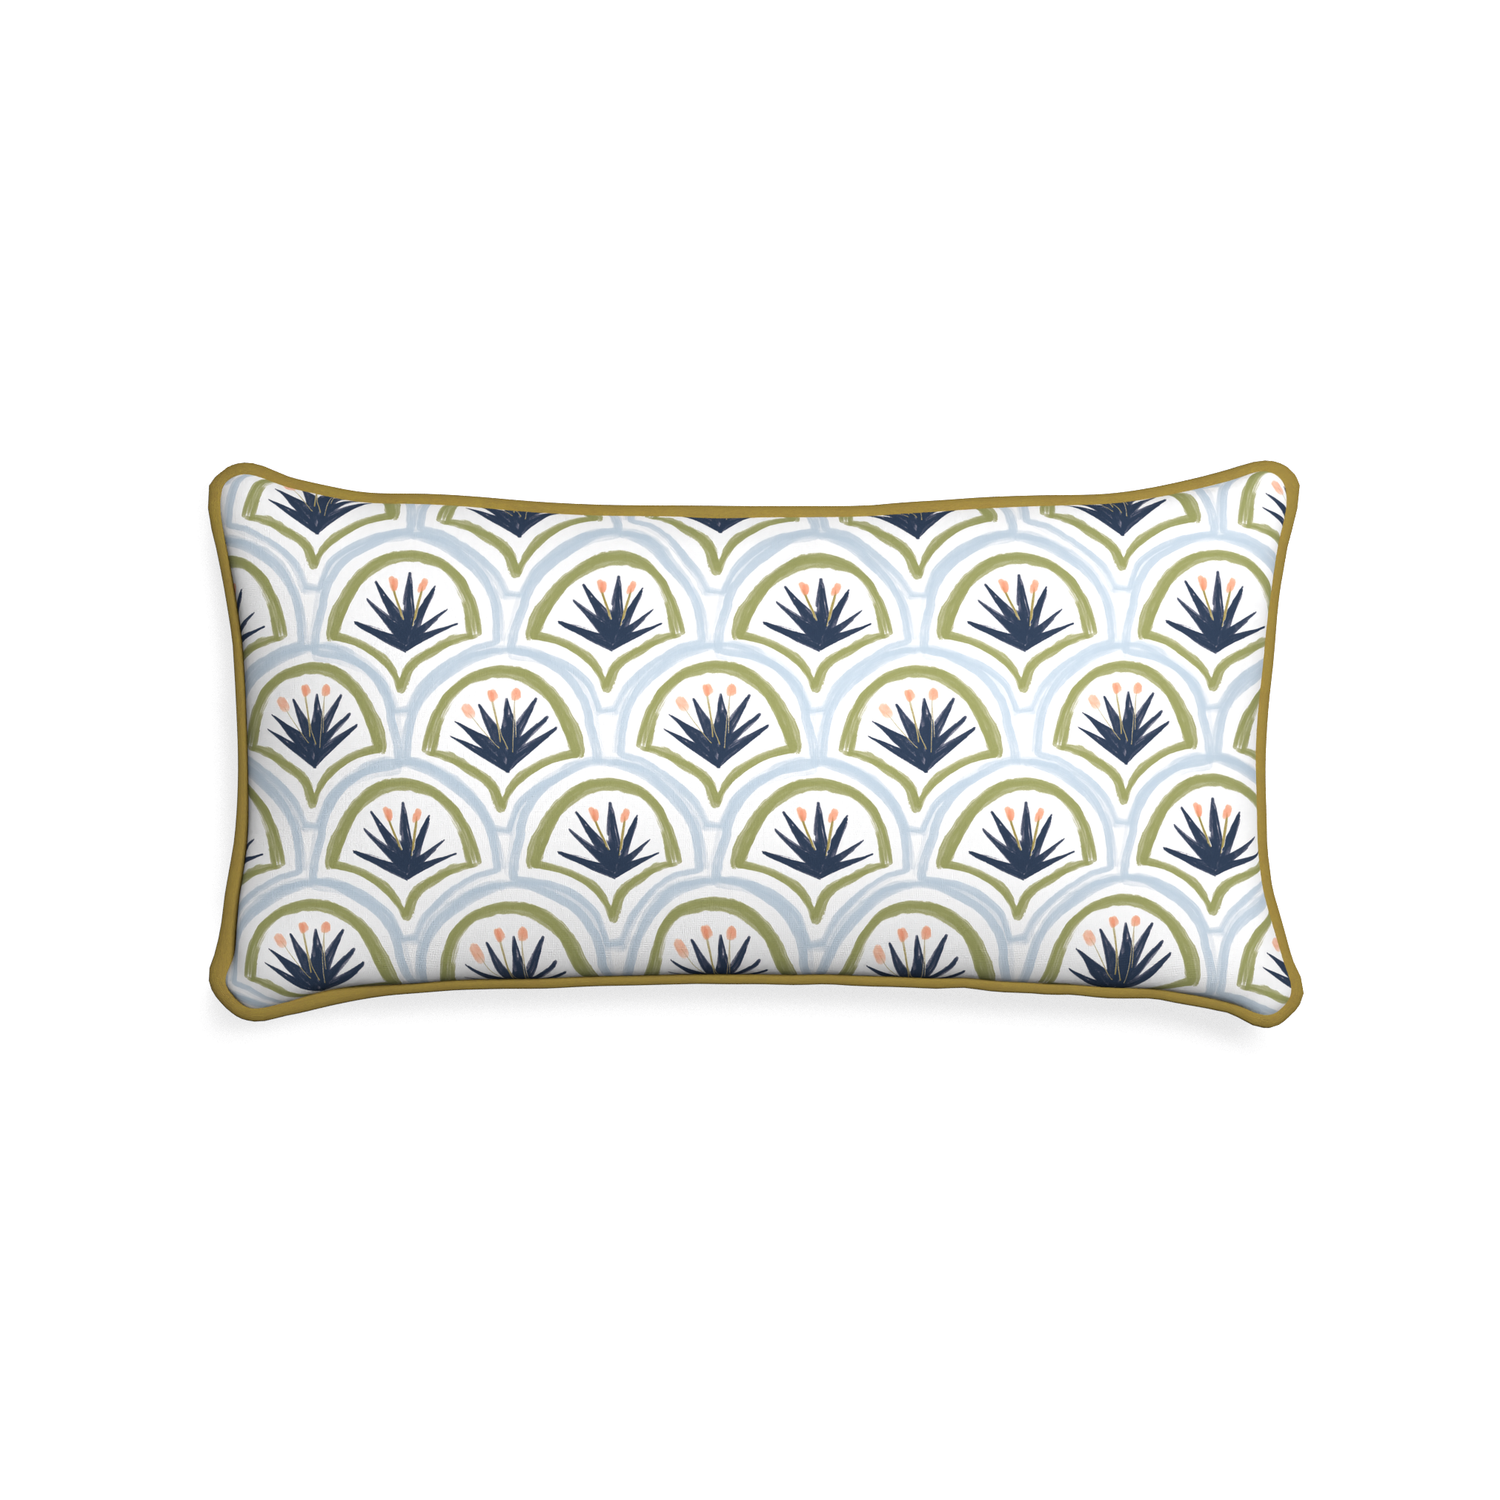 Midi-lumbar thatcher midnight custom art deco palm patternpillow with c piping on white background